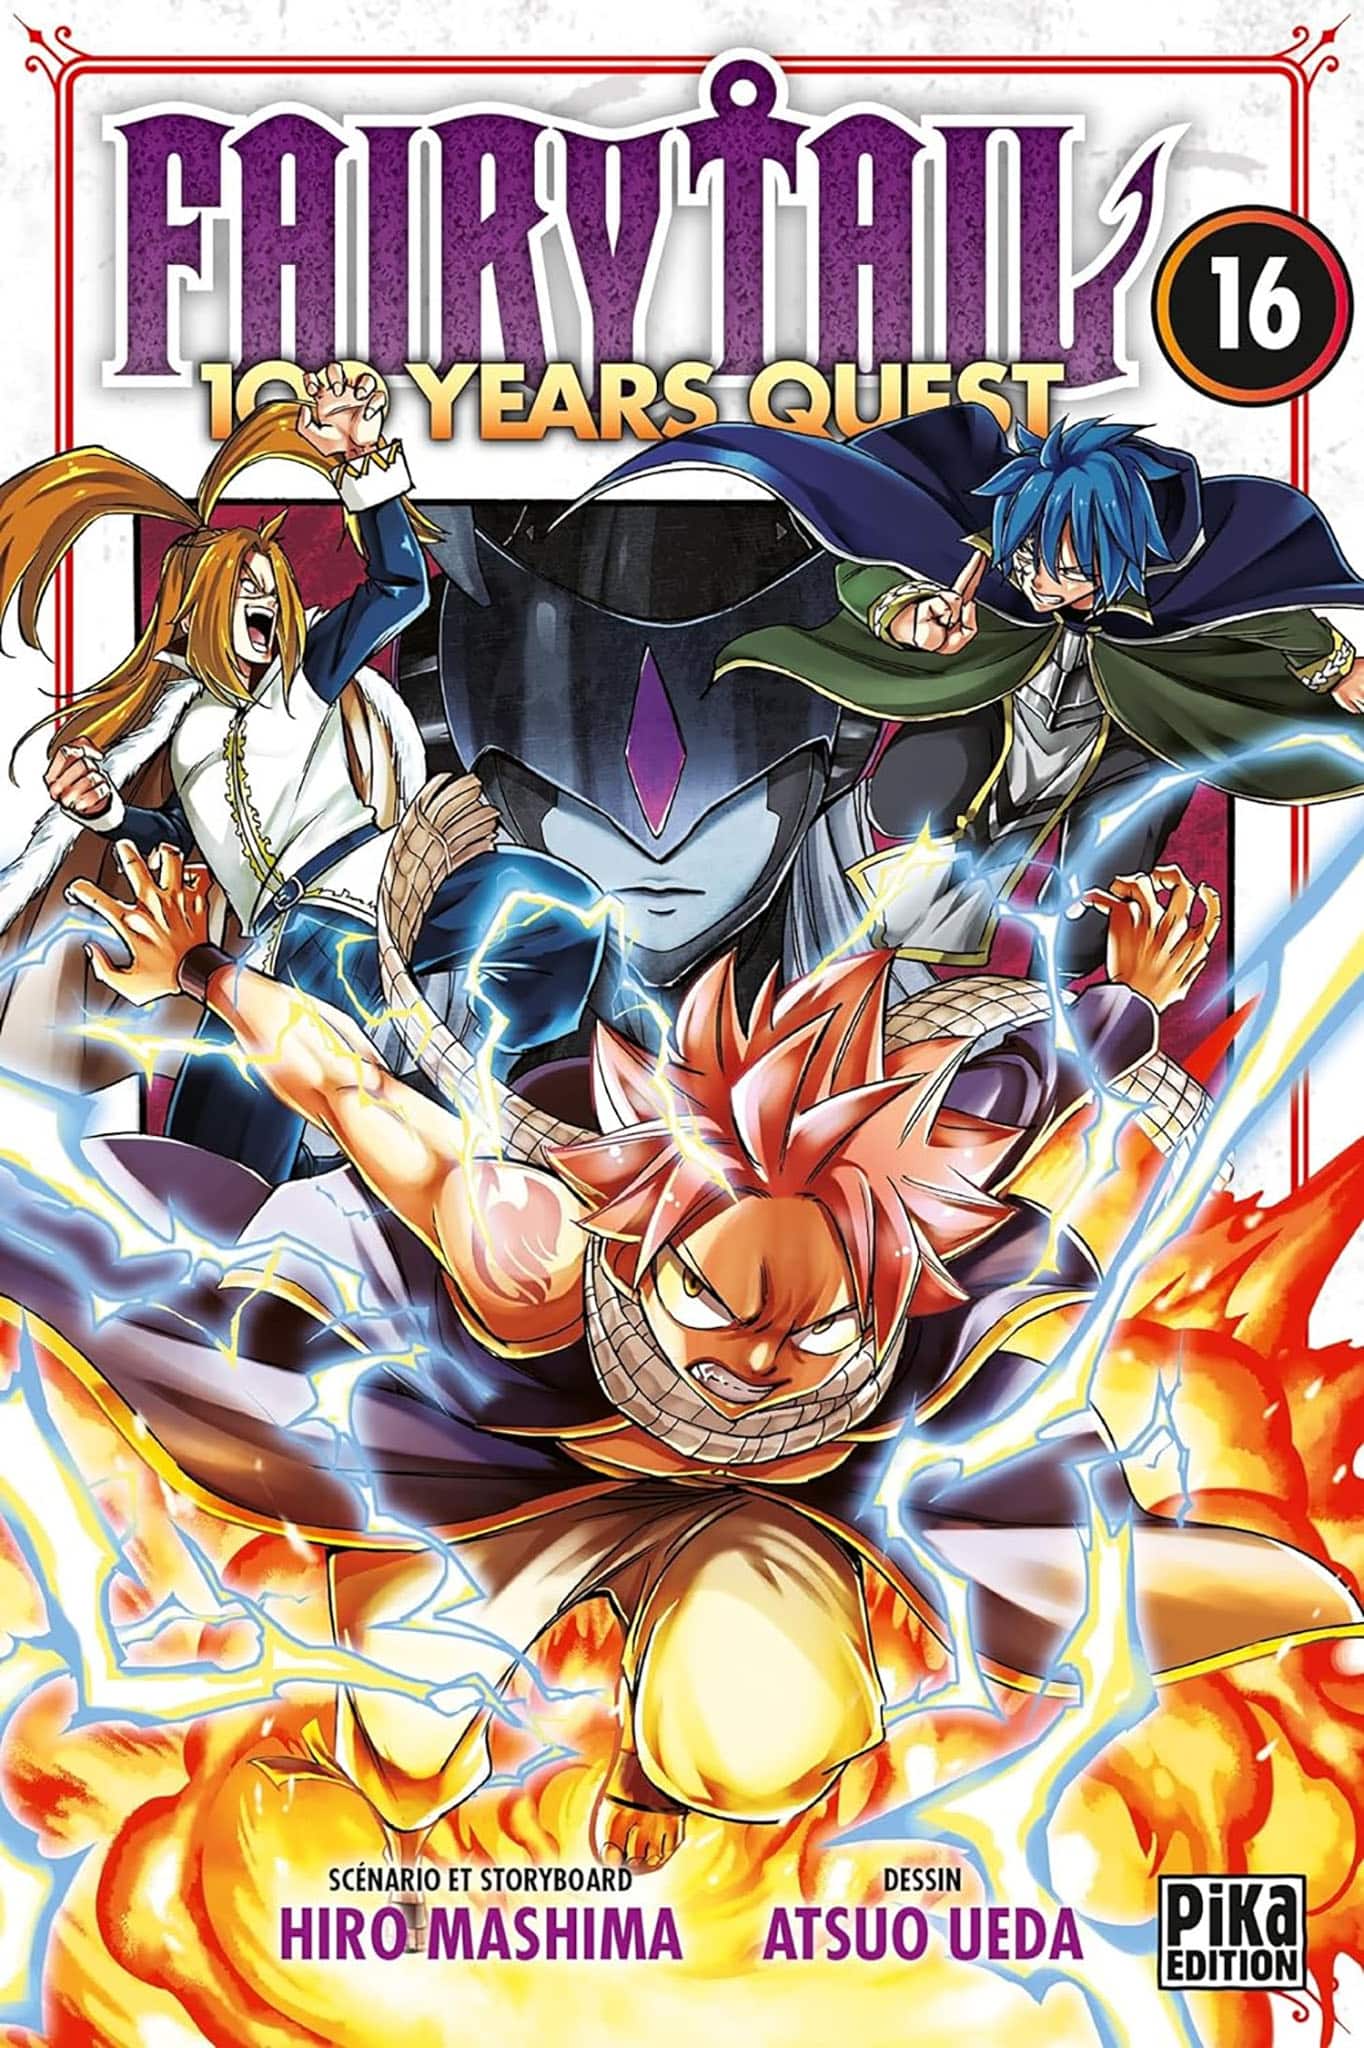 Tome 16 du manga Fairy Tail 100 Years Quest.